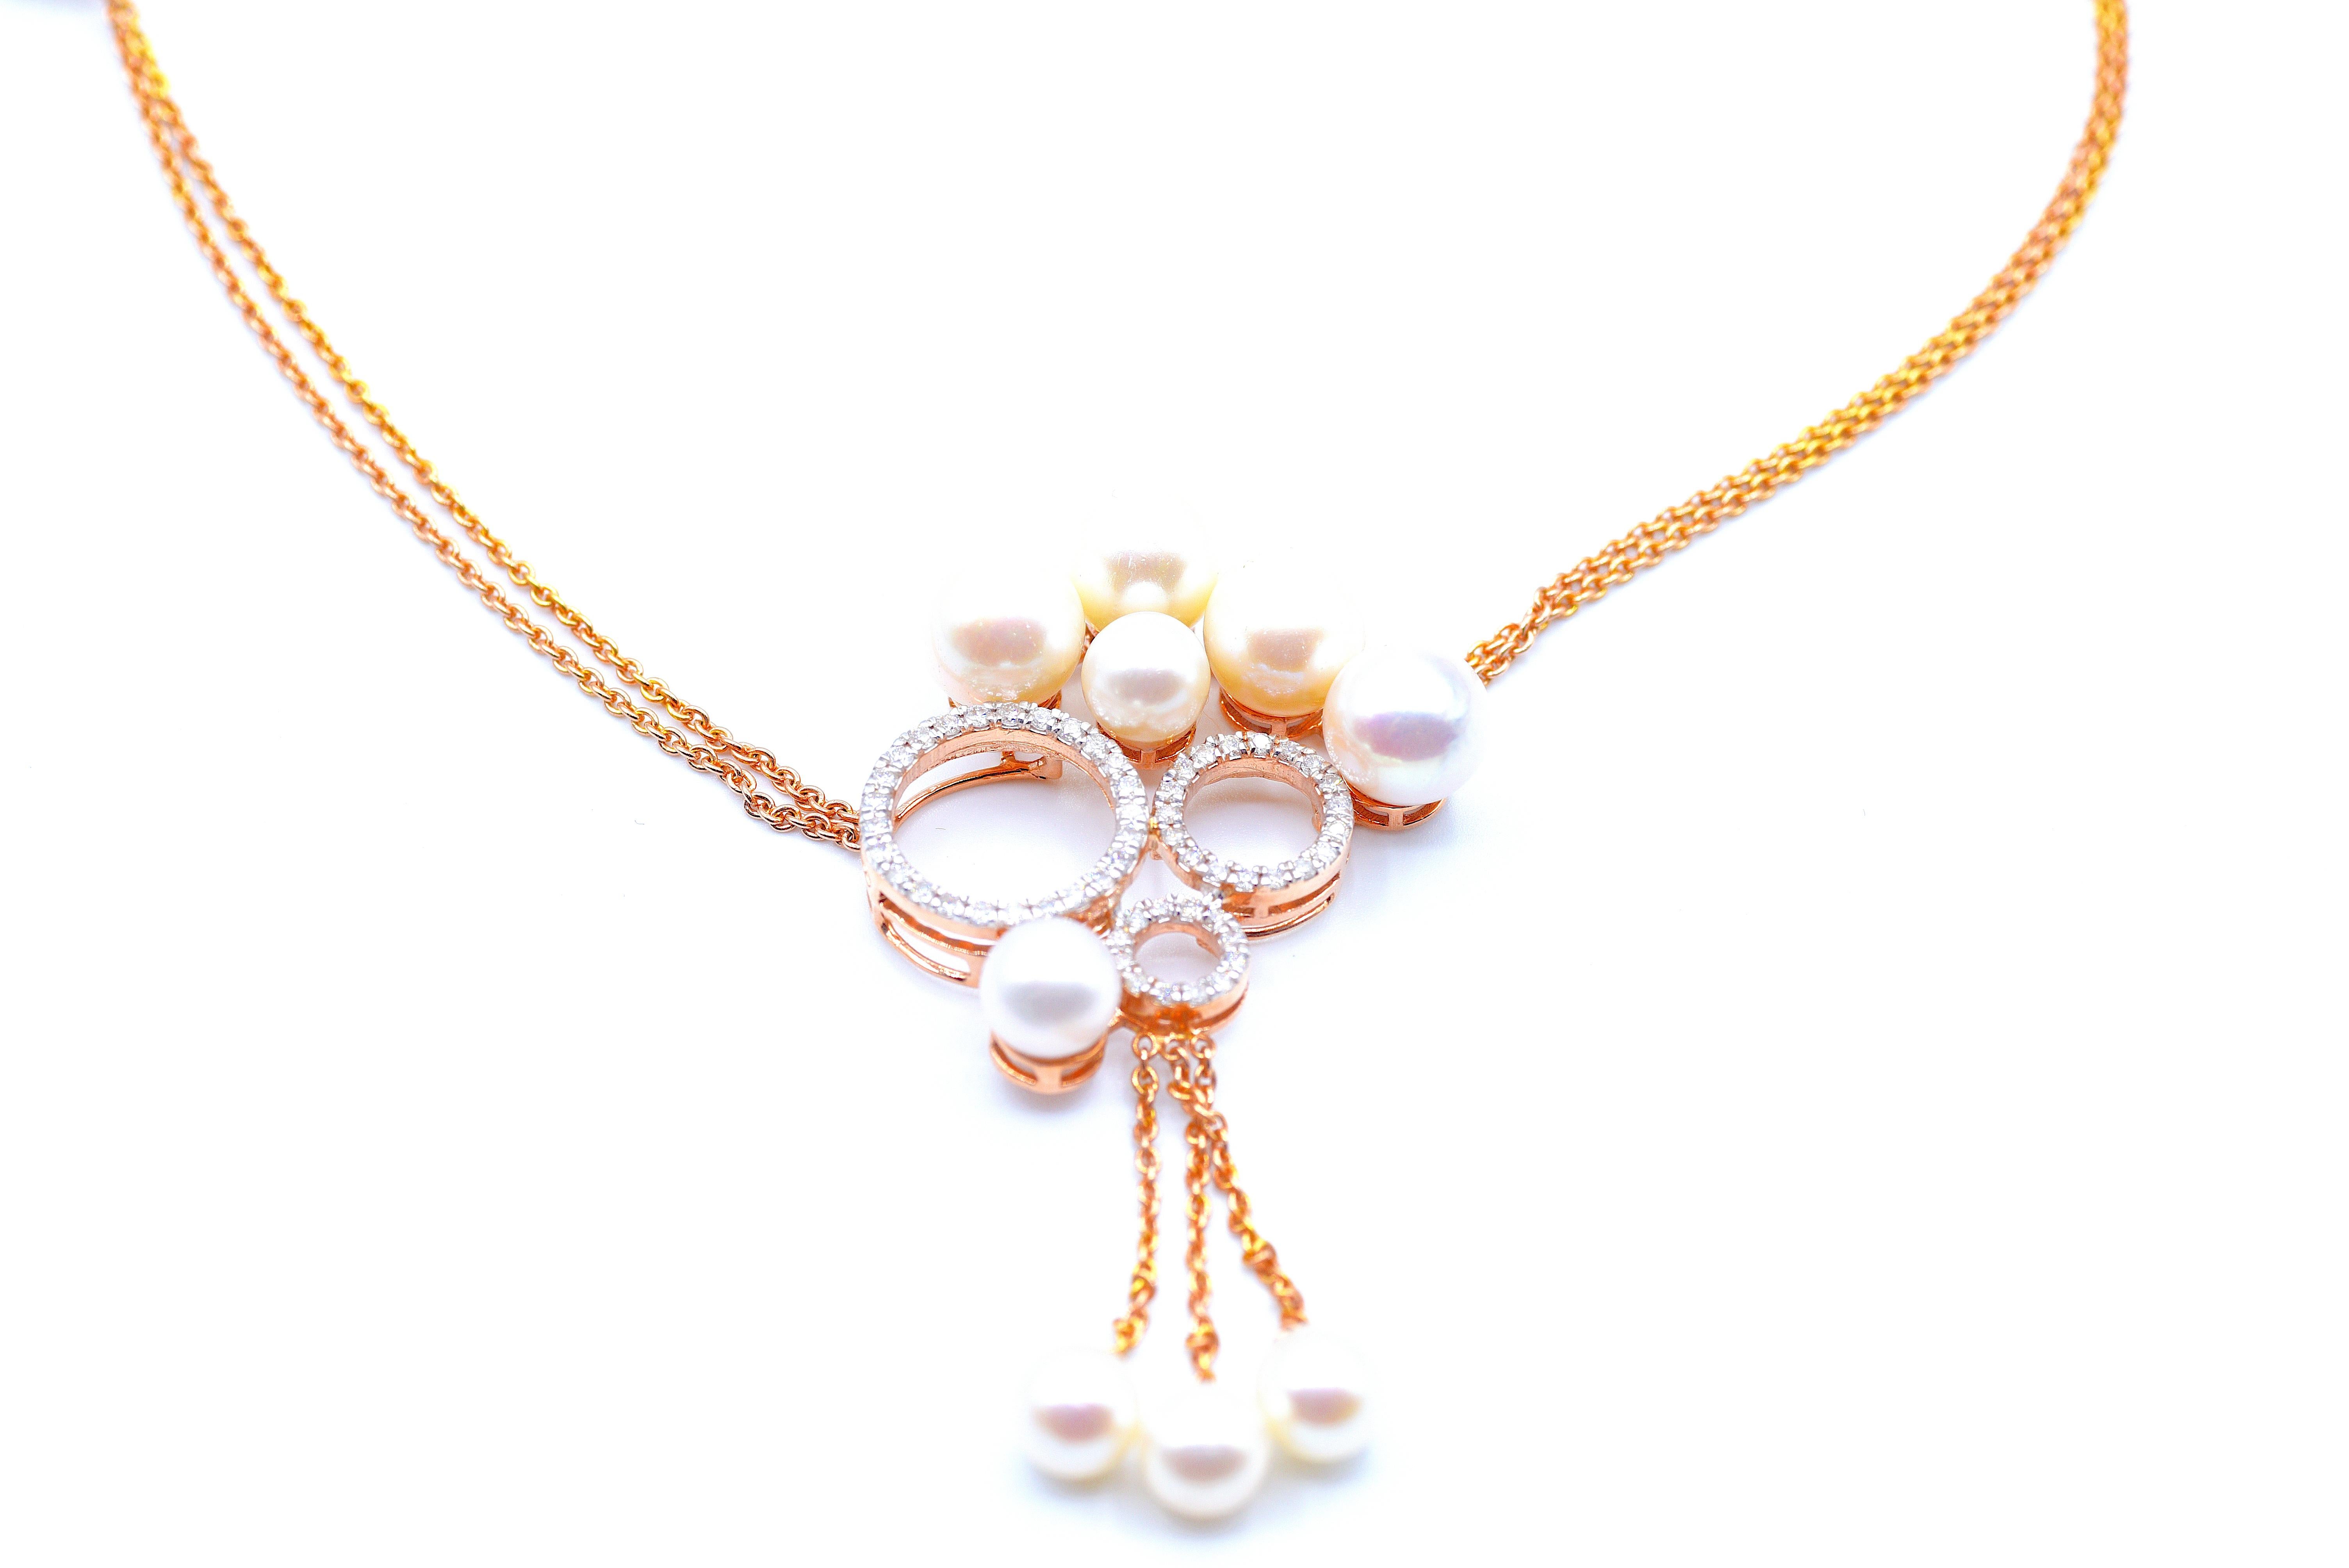 This exquisite diamond necklace in 18k rose gold features a trio of diamond circles embellished with dazzling diamonds and lustrous pearls. The cable chain is an 18k rose gold chain of length 16